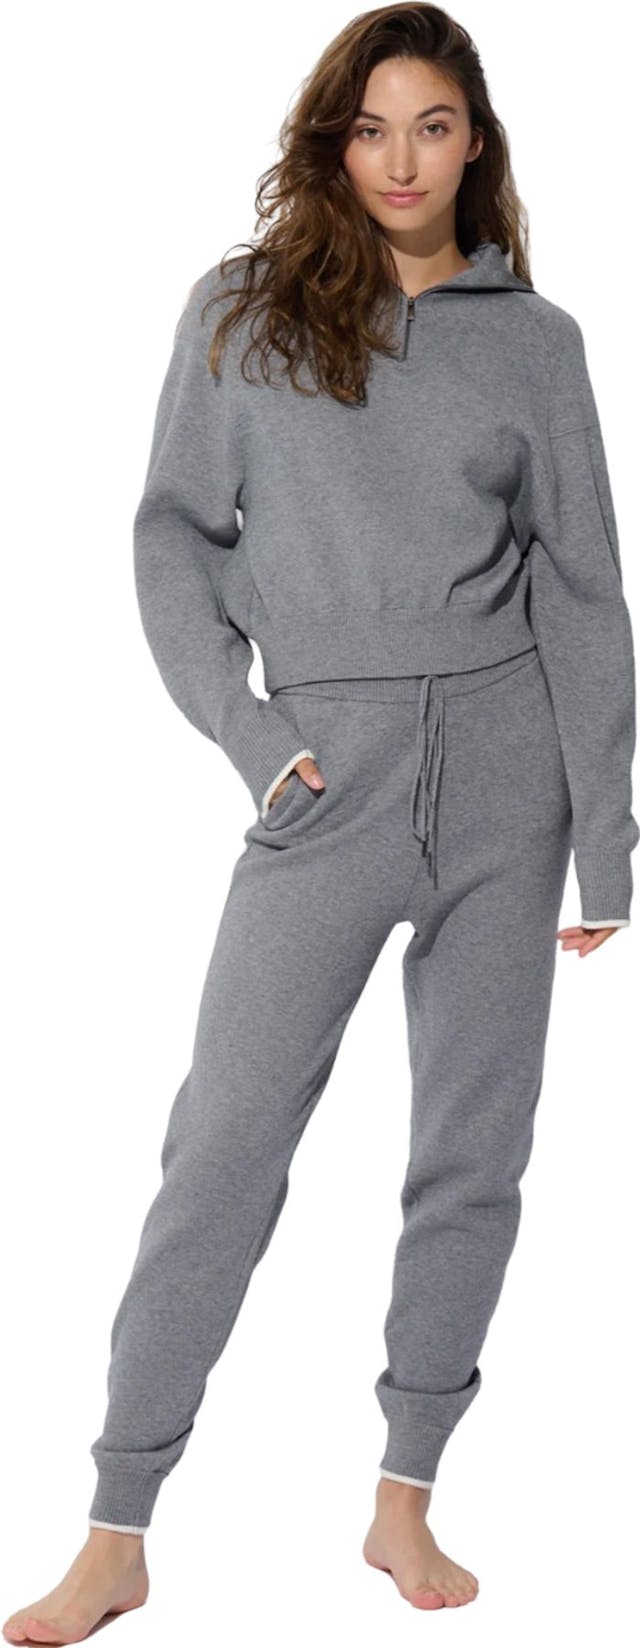 Product image for Tricot Jogger - Women's